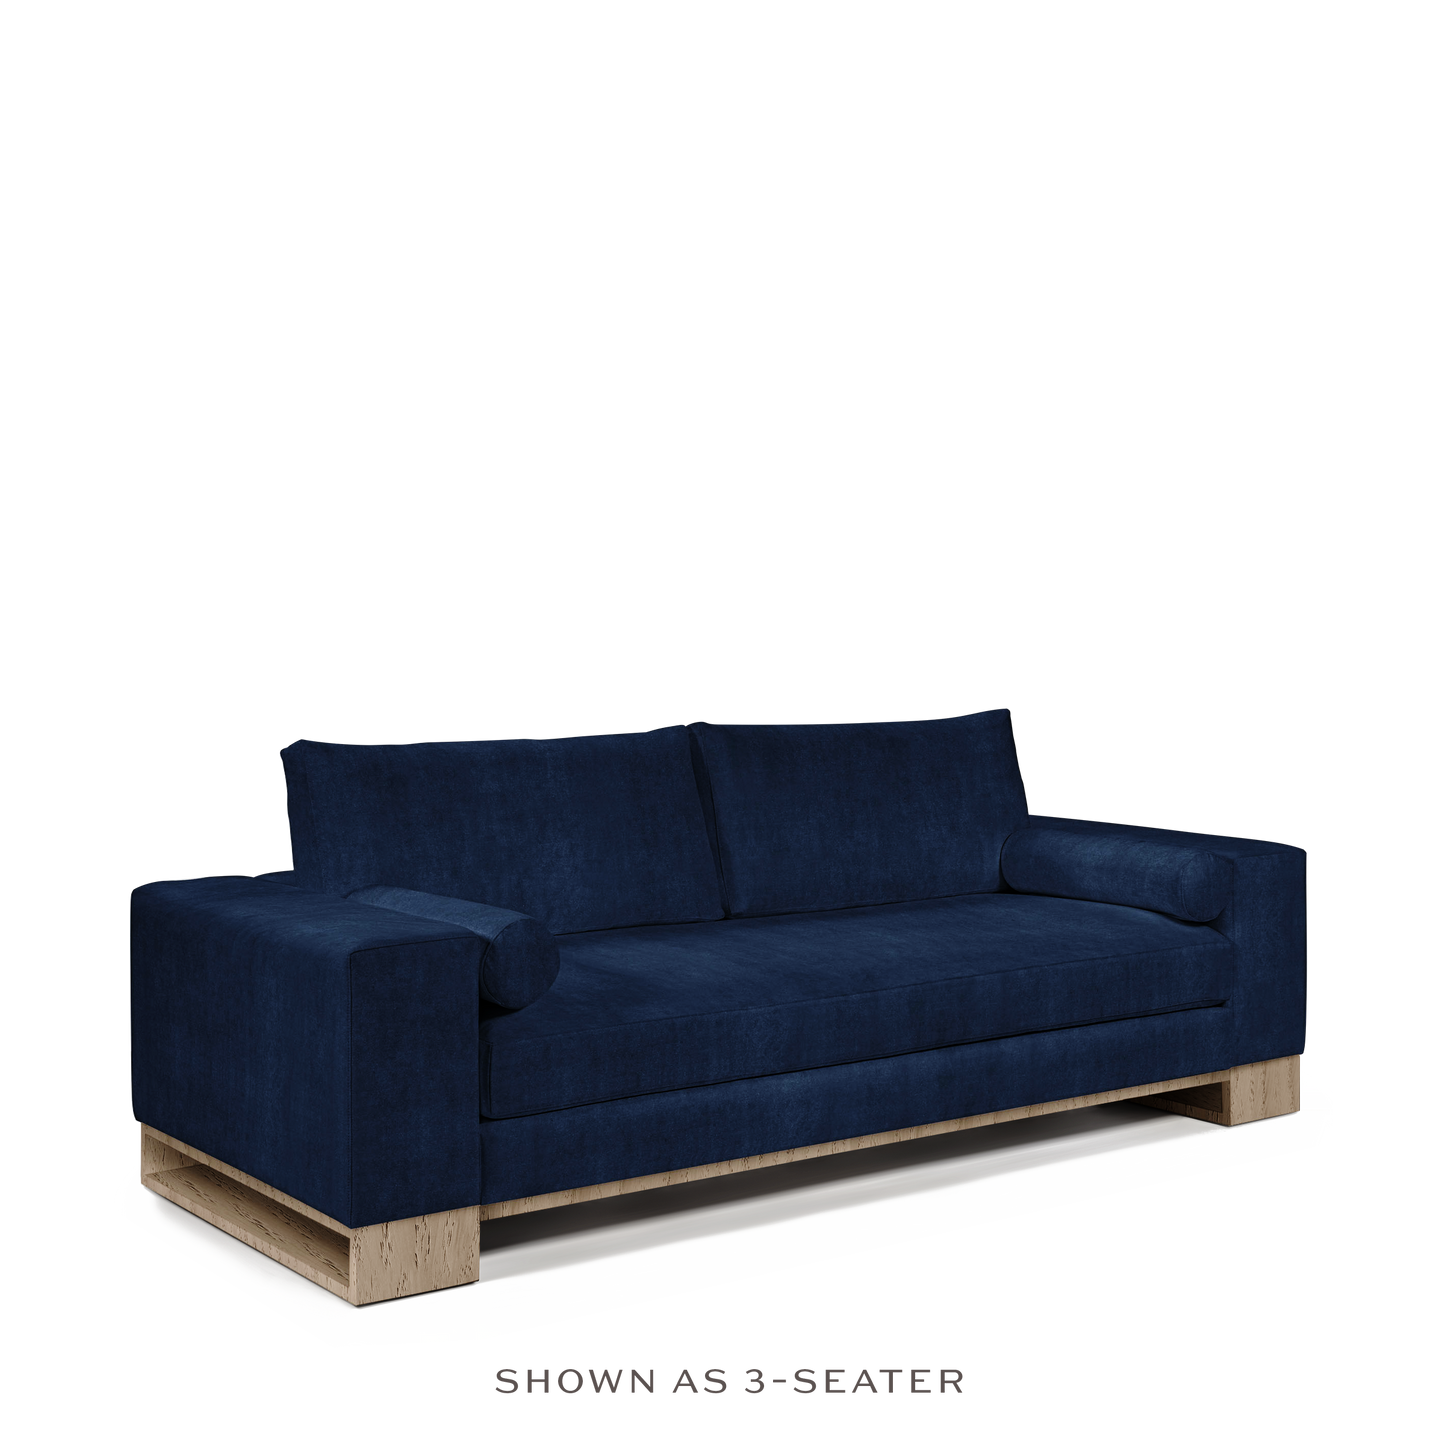 TERRA 3-seater sofa with london dark blue textile and natural grey wood legs